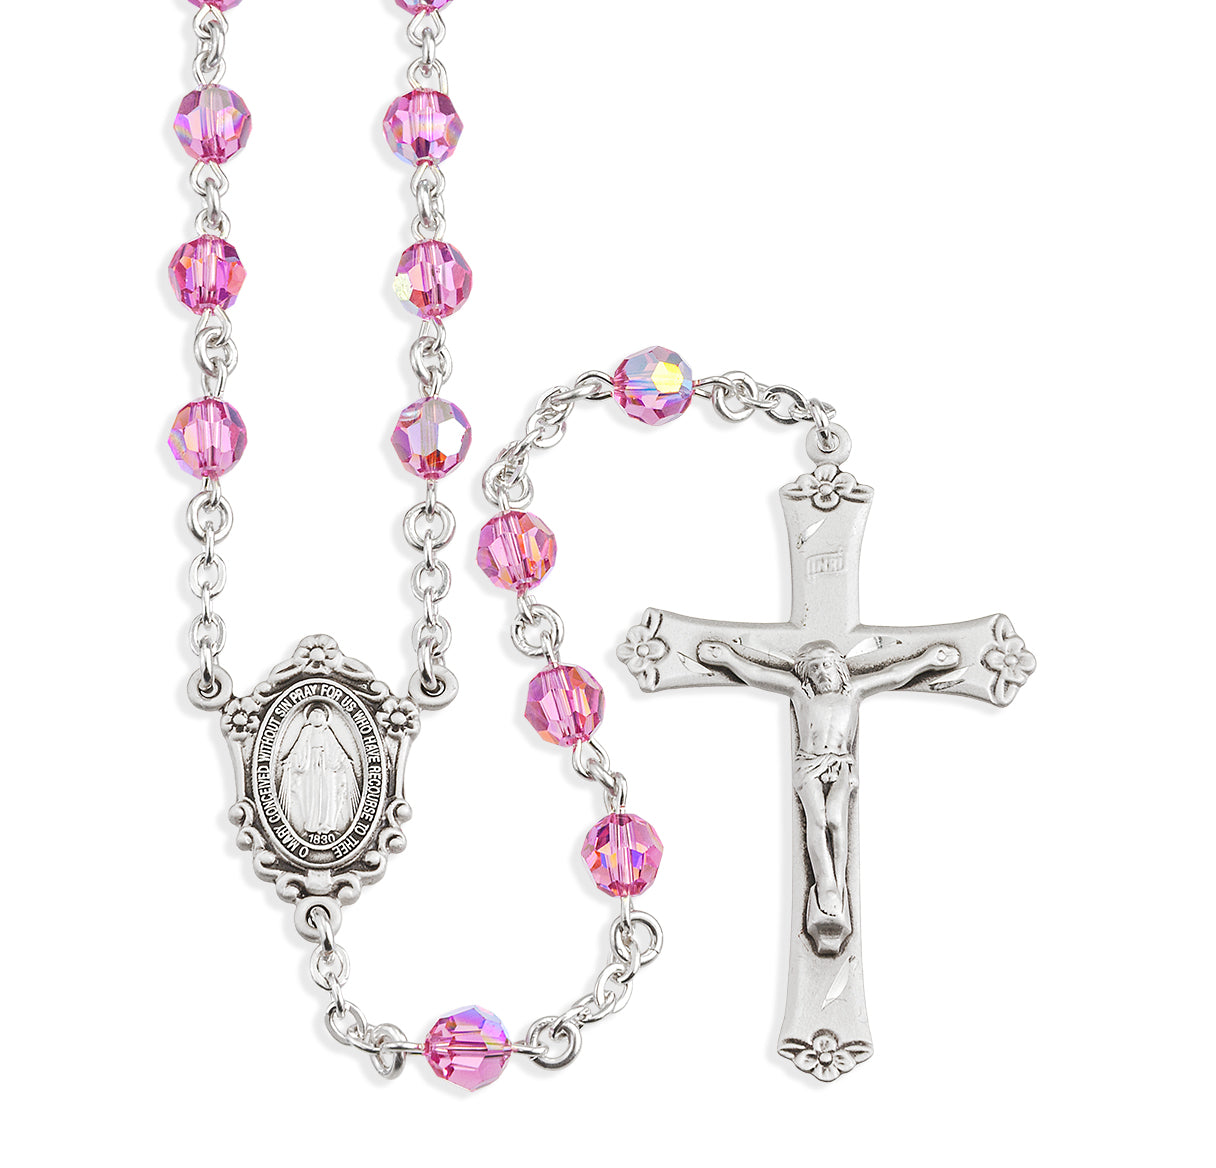 Rosary Sterling Crucifix and Centerpiece Created with Swarovski Crystal 6mm Faceted Round Pink Beads by HMH